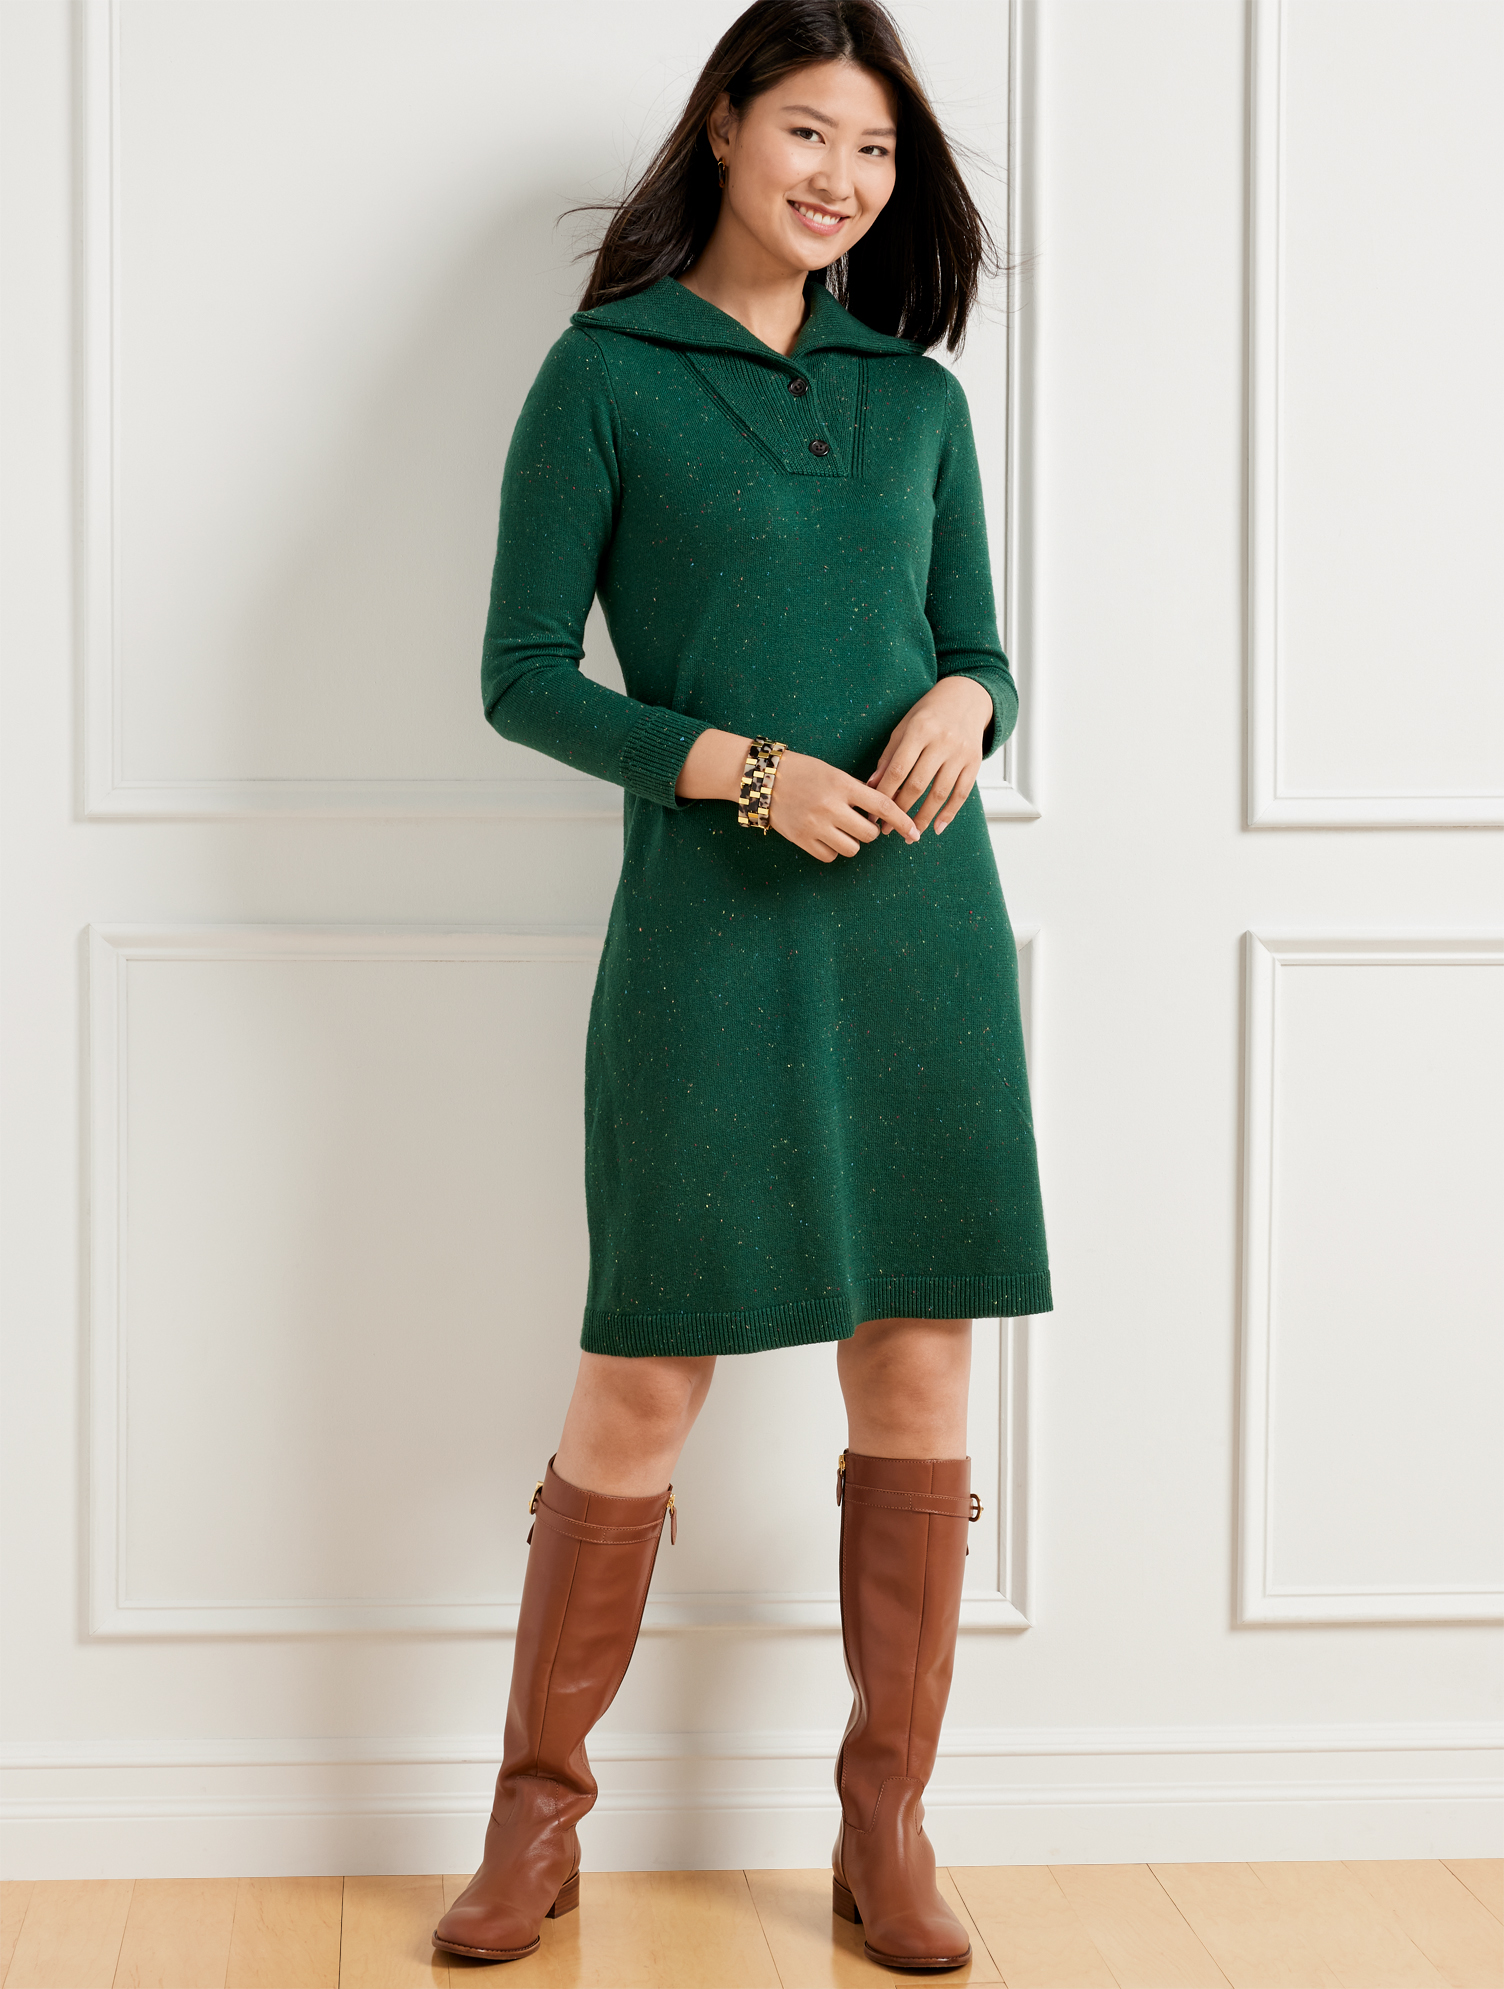 Talbots Supersoft Johnny Collar Sweater Dress - Tweed - Green Forest - 3x